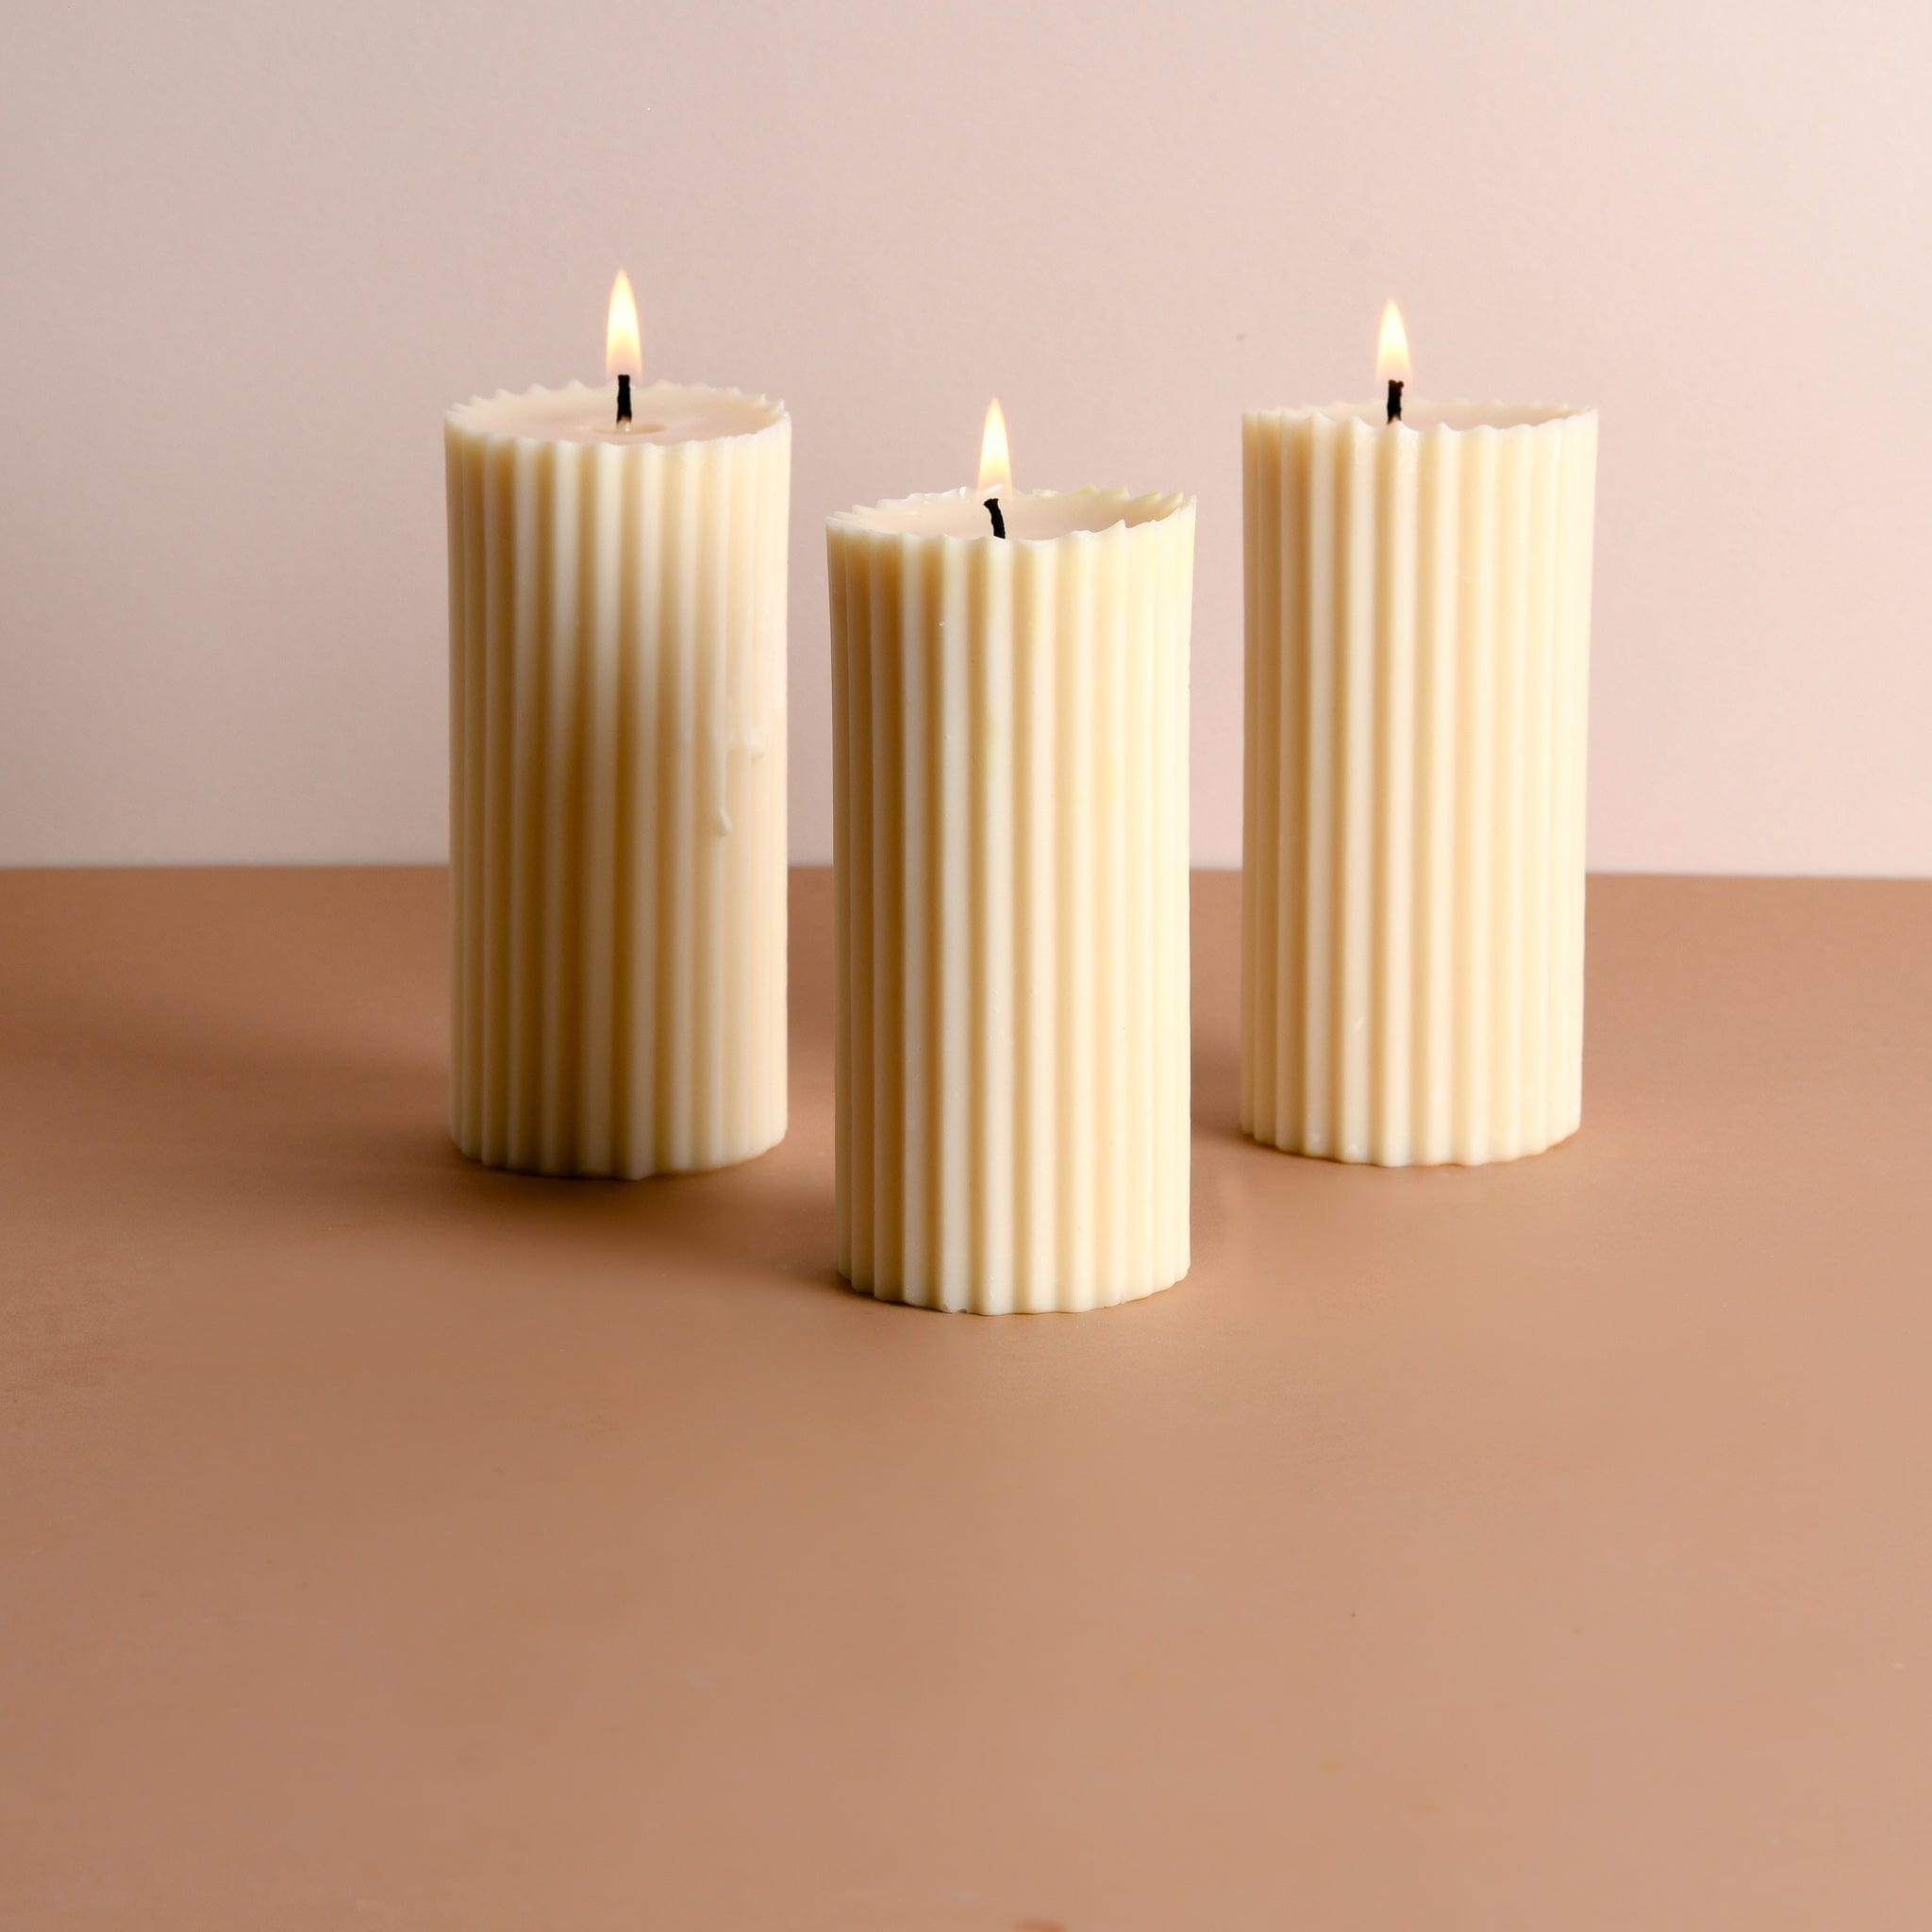 Combo of 3 Violet 'Belief' Candles - San Rose Scented